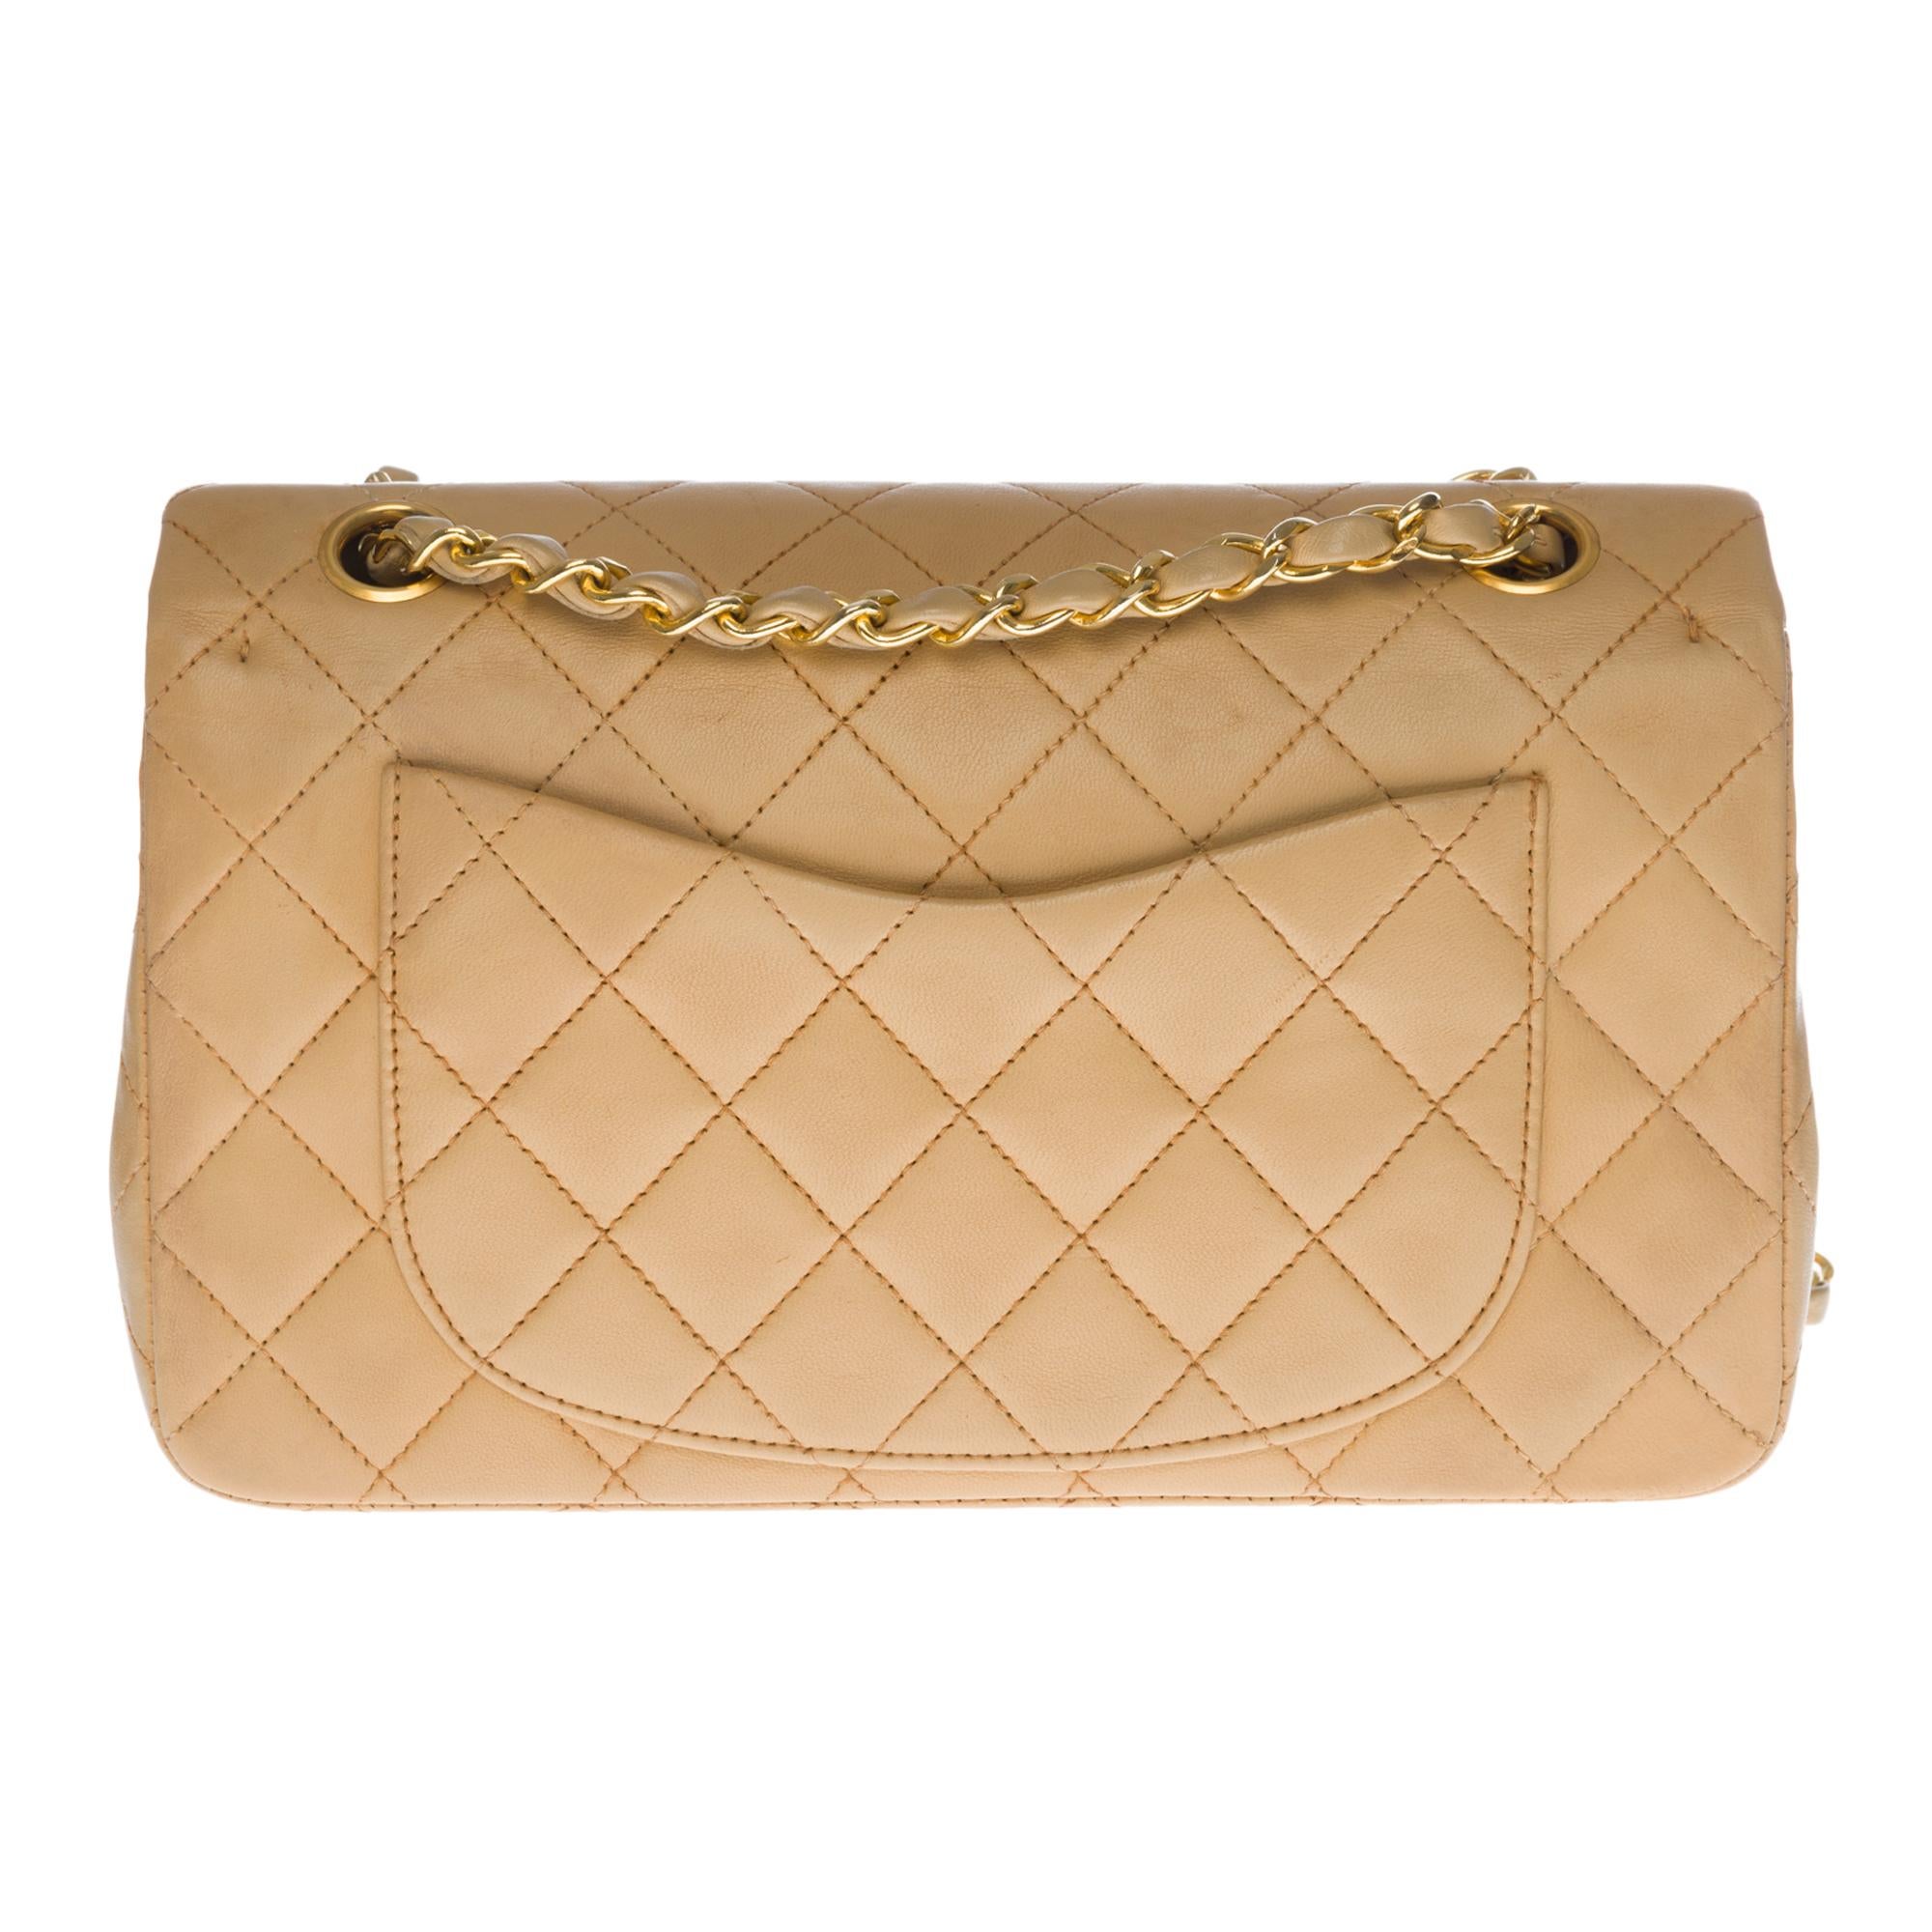 The coveted Chanel Timeless 23cm double flap bag in beige quilted lambskin leather, gold metal hardware, gold metal chain intertwined with beige leather for a shoulder and shoulder strap
Pocket on the back of the bag
Flap closure, gold-tone CC logo